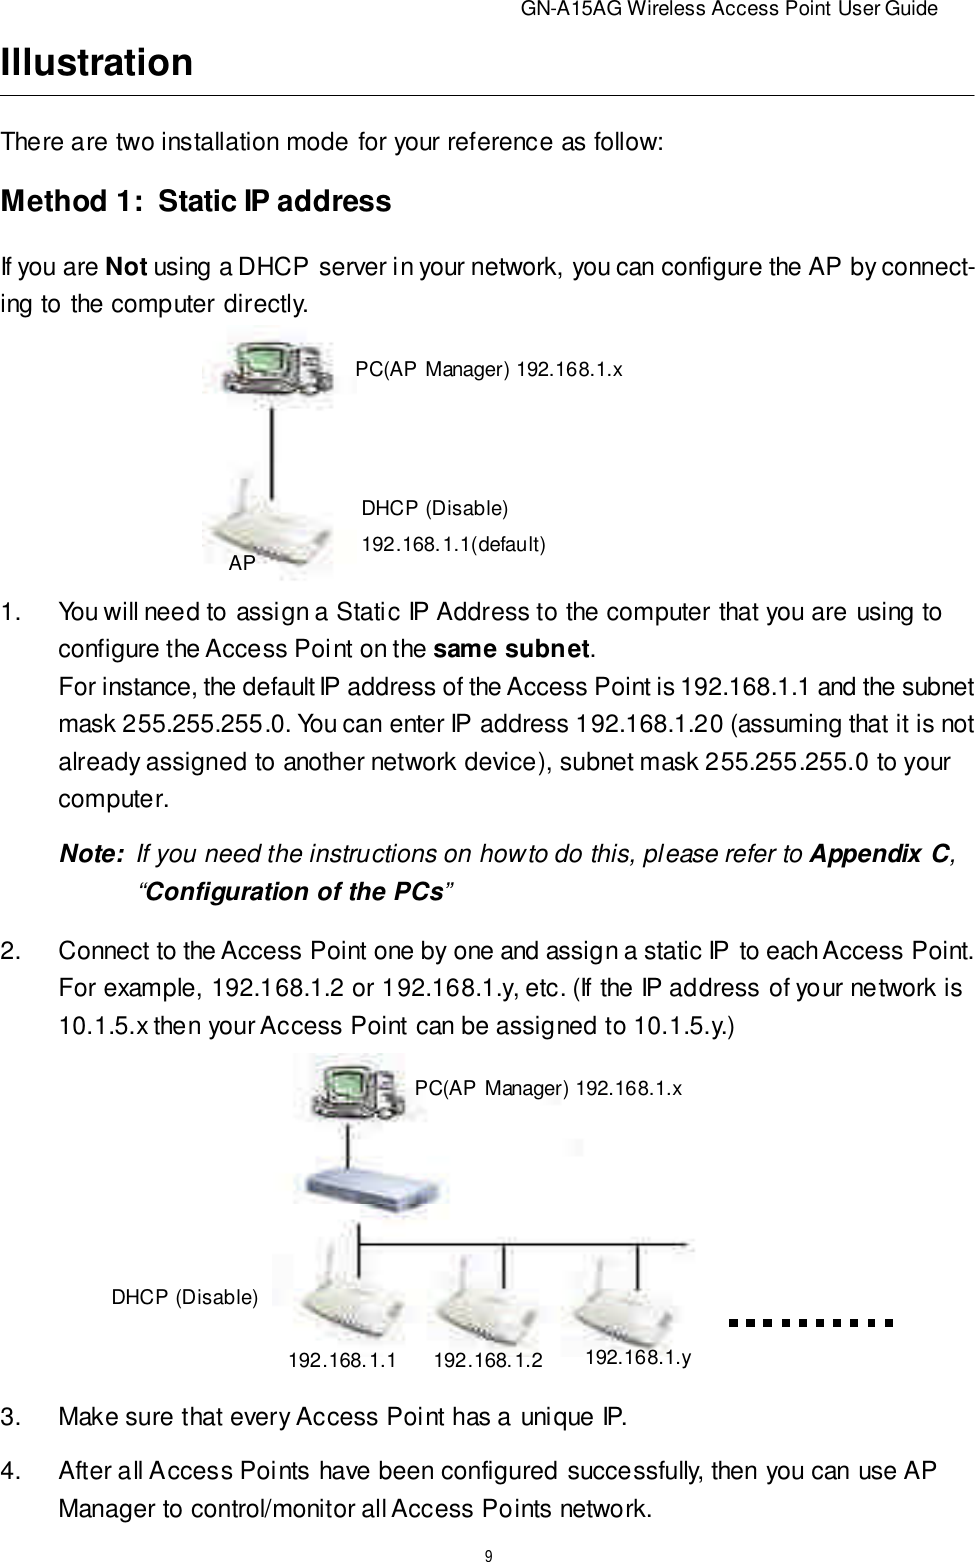                          GN-A15AG Wireless Access Point User Guide9IllustrationThere are two installation mode for your reference as follow:Method 1:   Static IP addressIf you are Not using a DHCP server in your network, you can configure the AP by connect-ing to the computer directly.PC(AP Manager) 192.168.1.xDHCP (Disable)192.168.1.1(default)AP1.You will need to assign a Static IP Address to the computer that you are using toconfigure the Access Point on the same subnet.For instance, the default IP address of the Access Point is 192.168.1.1 and the subnetmask 255.255.255.0. You can enter IP address 192.168.1.20 (assuming that it is notalready assigned to another network device), subnet mask 255.255.255.0 to yourcomputer.Note:  If you need the instructions on how to do this, please refer to Appendix C,   “Configuration of the PCs”2.Connect to the Access Point one by one and assign a static IP to each Access Point.For example, 192.168.1.2 or 192.168.1.y, etc. (If the IP address of your network is10.1.5.x then your Access Point can be assigned to 10.1.5.y.)3.Make sure that every Access Point has a unique IP.4.After all Access Points have been configured successfully, then you can use APManager to control/monitor all Access Points network.PC(AP Manager) 192.168.1.xDHCP (Disable)192.168.1.1 192.168.1.2192.168.1.y